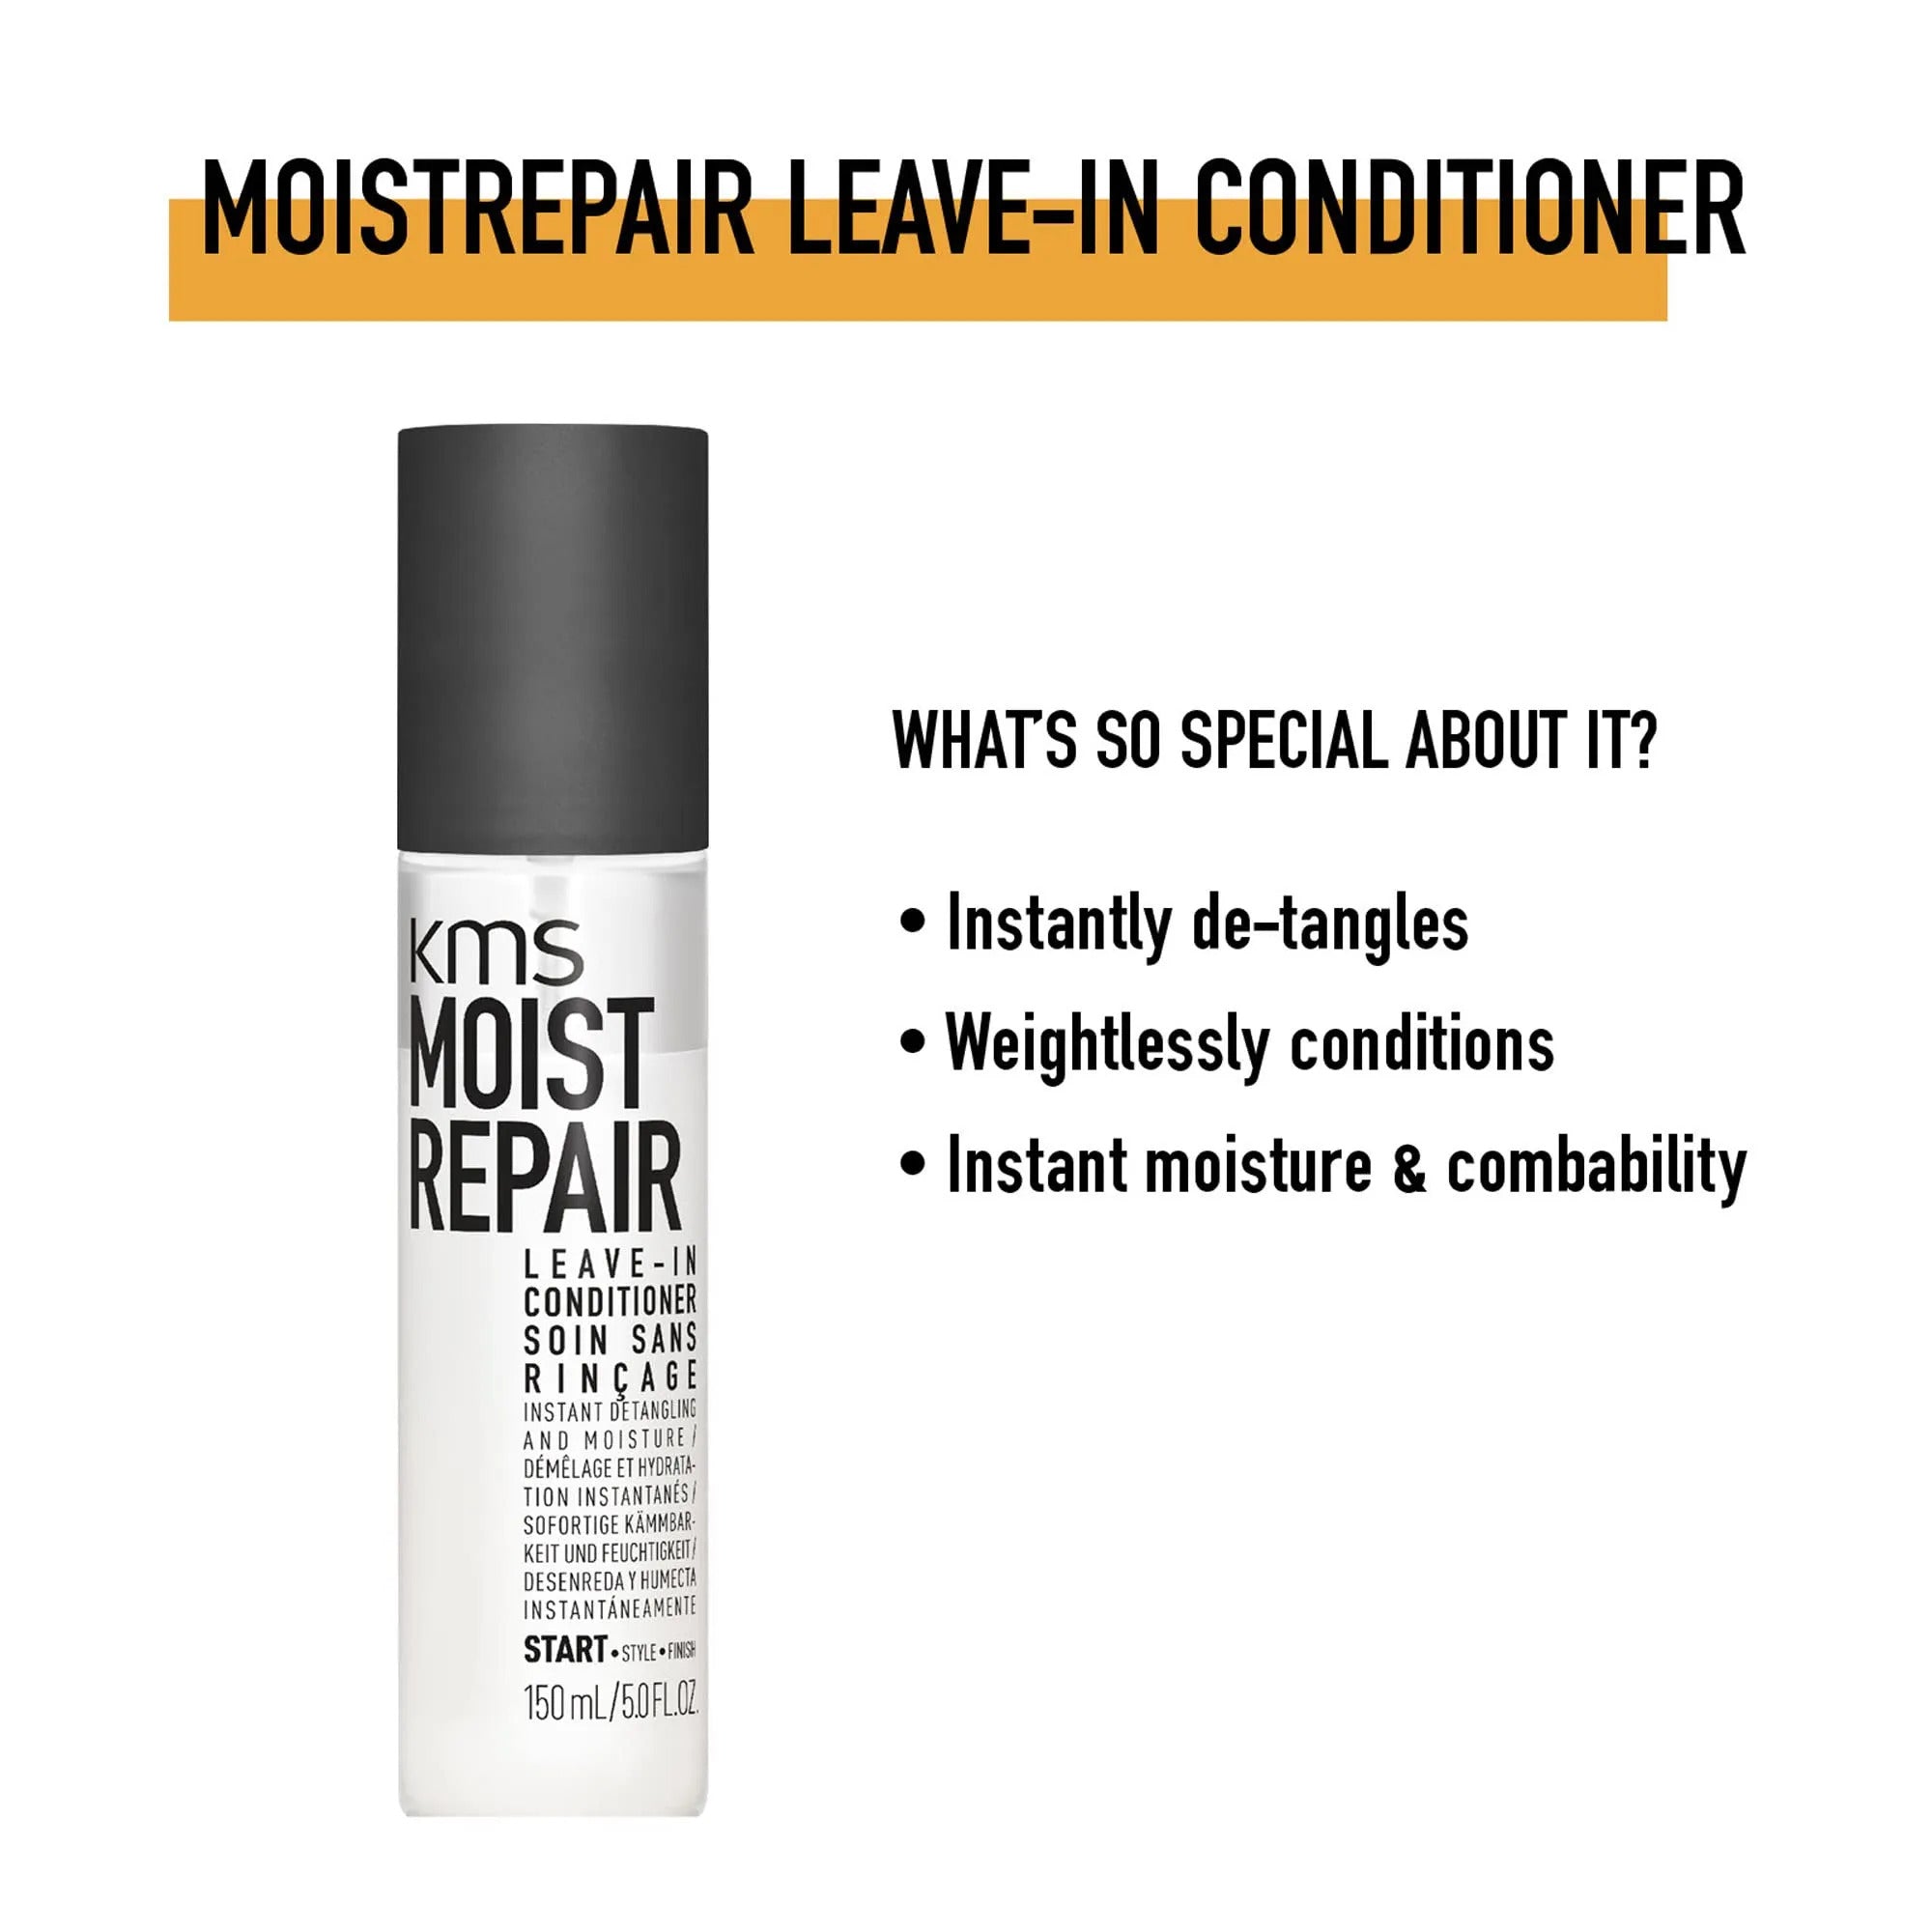 KMS MOIST REPAIR LEAVE IN CONDITIONER DETANGLE AND MOISTURE